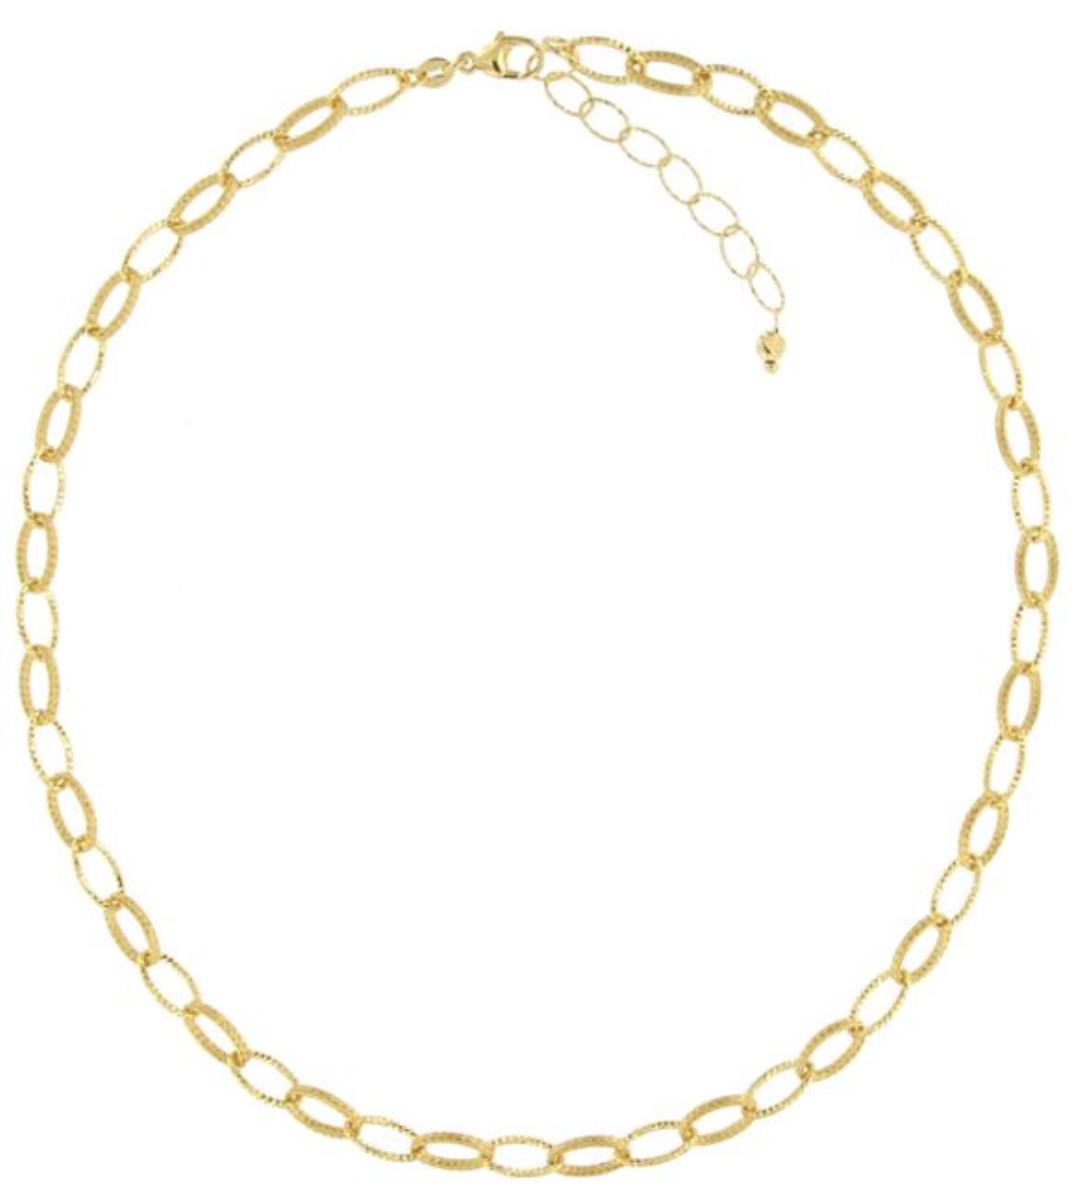 14K Yellow Gold Alternating High Polish and Diamond Cut Oval Shape Links Necklace, 17" + 2" Extender